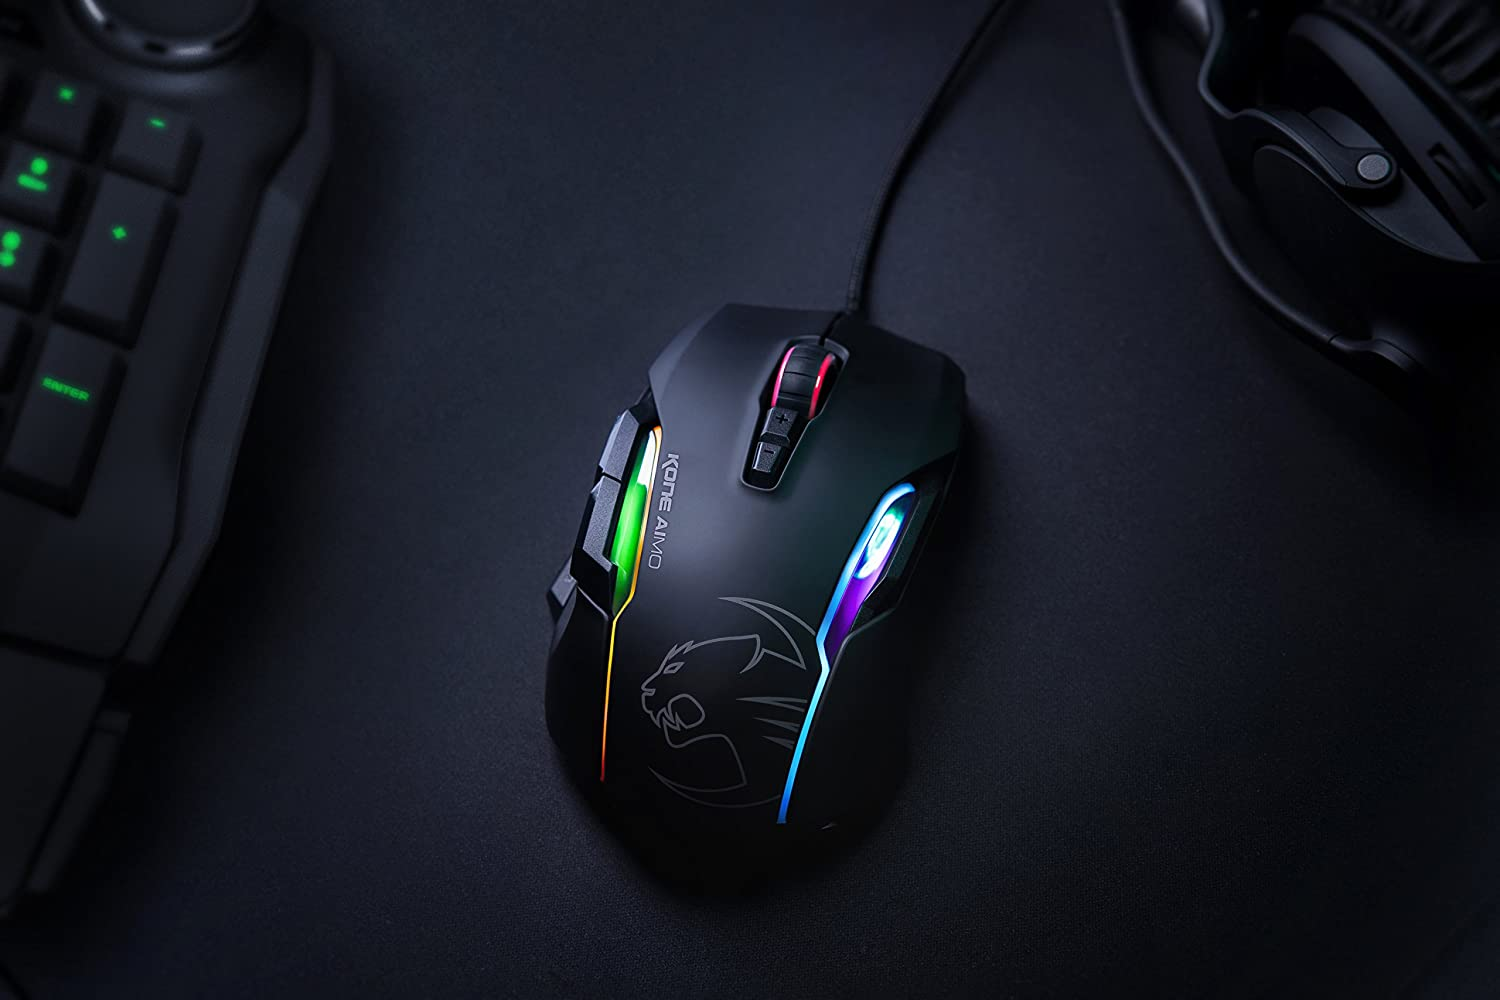 Lwzwigie Roccat Https://Youtu.be/Mfk3Bmiiu8C Roccat® Swarm Powered – Comprehensive Driver Suite With A Striking Design And A Stunning Feature Set, The Kone Aimo Channels The Legacy Of Its Predecessor. It Boasts Refined Ergonomics With Enhanced Button Distinction, But What Truly Sets It Apart Is Its Rgba Double Lightguides Powered By The State-Of-The-Art Aimo Intelligent Lighting System. Aimo Is The Vivid Illumination Eco-System From Roccat®. Its Functionality Grows Exponentially Based On The Number Of Aimo-Enabled Devices Connected. It Also Reacts Intuitively And Organically To Your Computing Behavior. Eliminating The Need For Configuration, It Presents A State-Of-The-Art Lighting Scenario Right Out Of The Box, For A Completely Fluid, Next-Gen Experience. The Kone Aimo Features A Tri-Button Thumb Zone For A New And Even Greater Level Of Control. It Includes Two Wide Buttons Suitable For All Hand Sizes, Plus An Ergonomic Lower Button Set To Easy-Shift[+]™ By Default. Easy-Shift[+]™ Is The World-Famous Button Duplicator Technology That Lets You Assign A Secondary Function To The Mouse'S Buttons. It'S Easy To Program And Has Options For Simple Commands And Complex Macros. Gaming Mouse Roccat - Kone Aimo Rgba Smart Customization Gaming Mouse (Black) 23 Programmable Keys, Designed In Germany